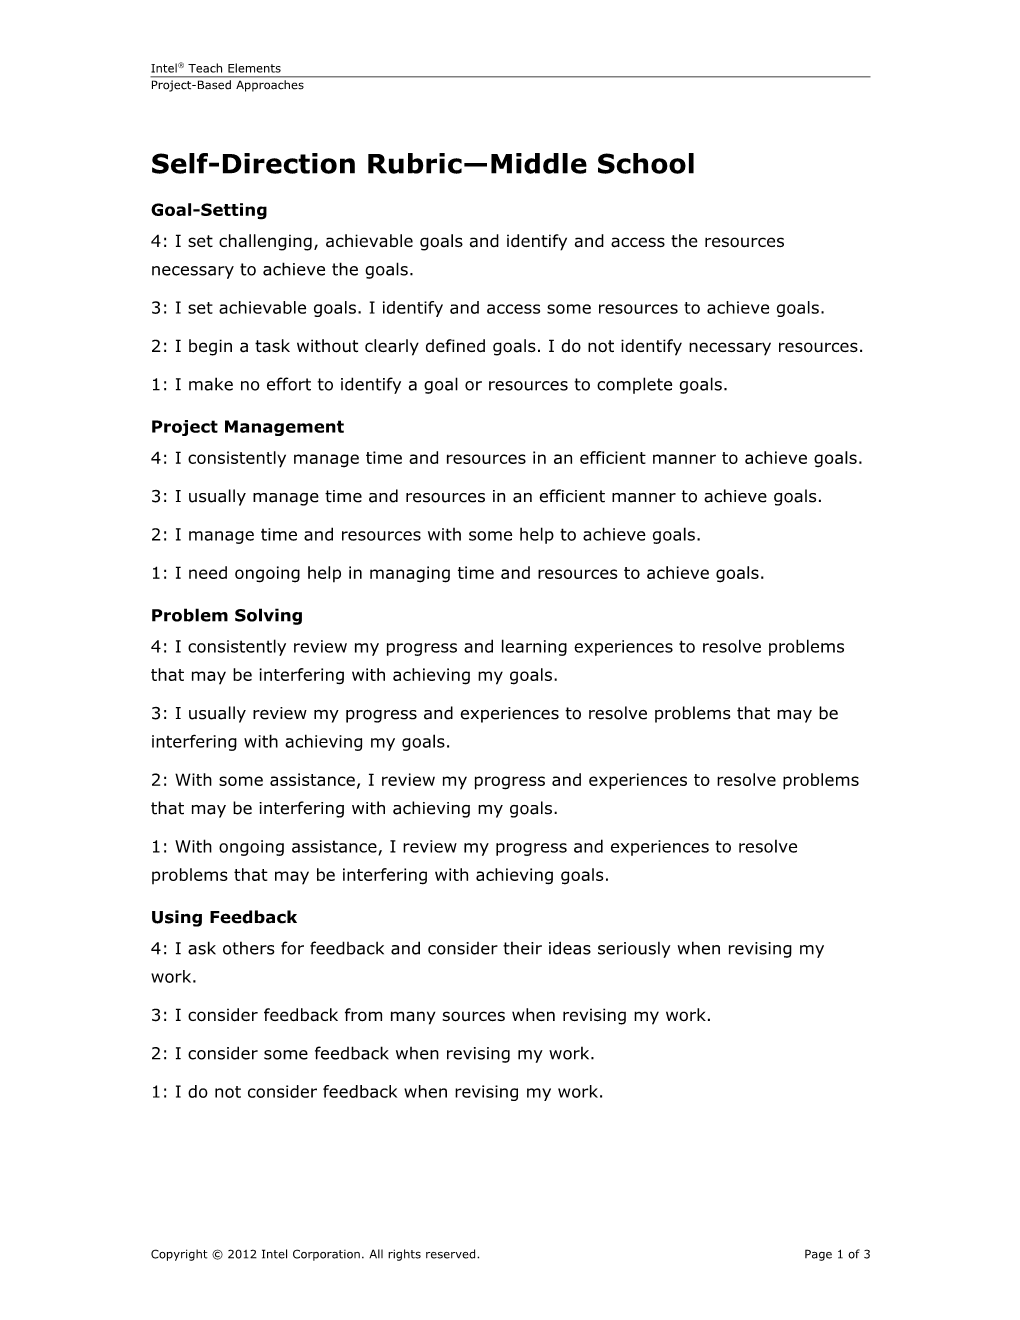 Self-Direction Rubric Middle School